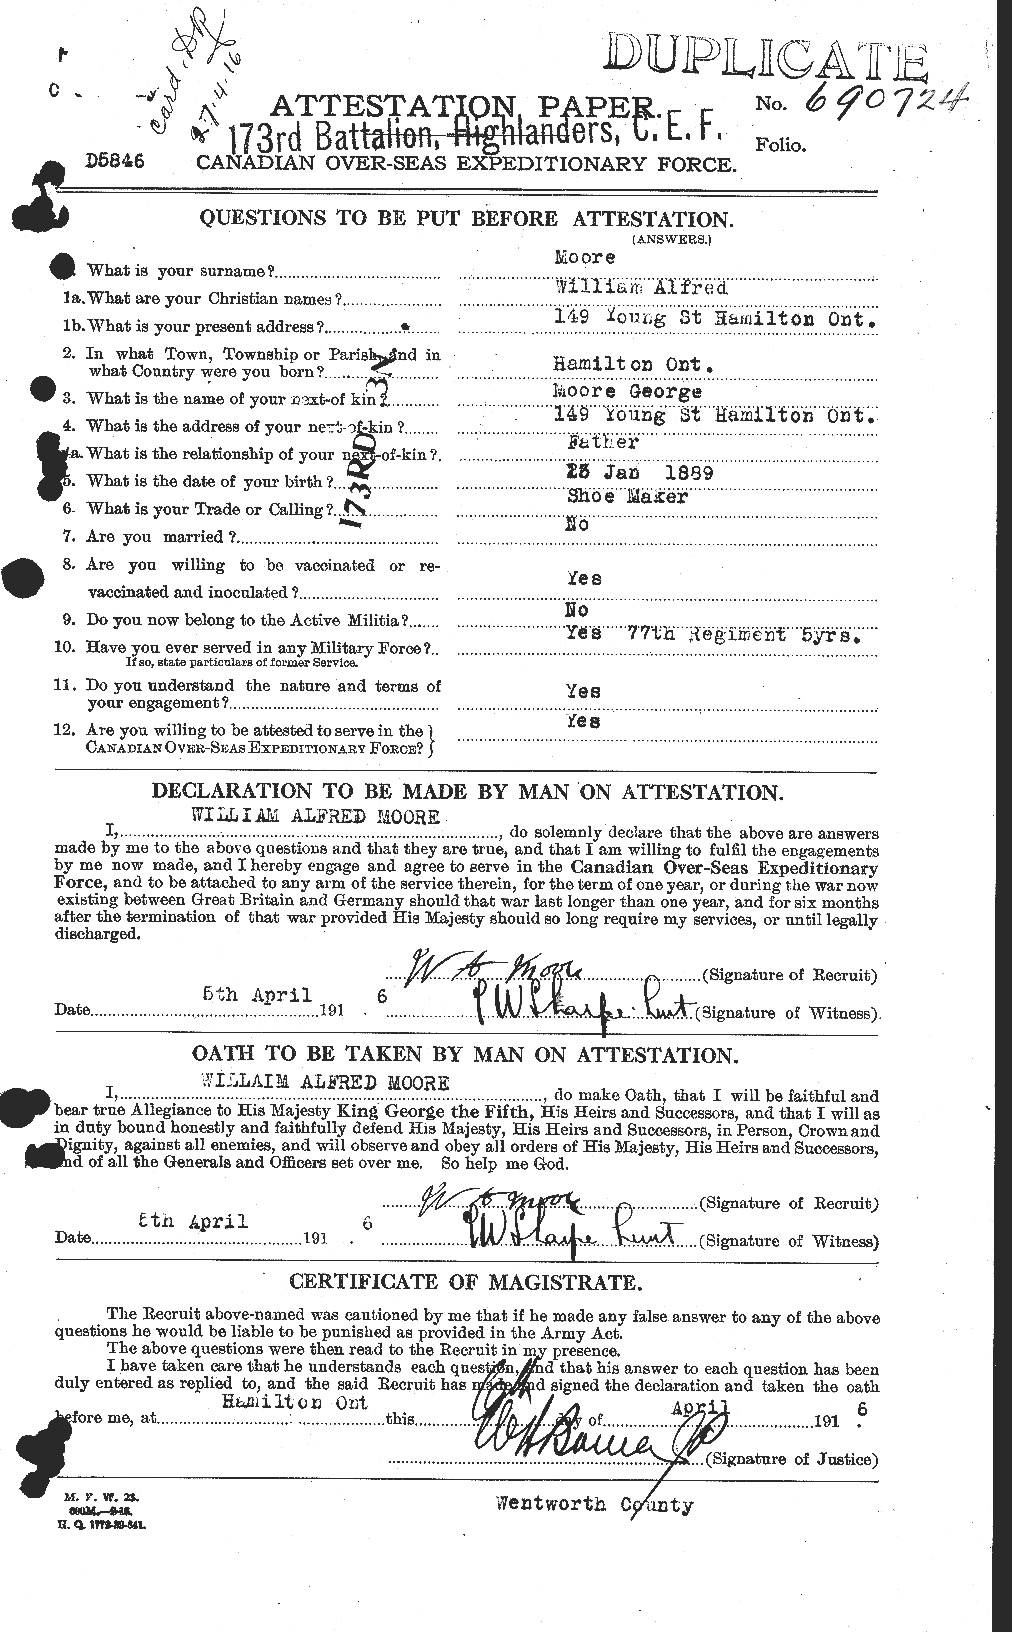 Personnel Records of the First World War - CEF 505770a